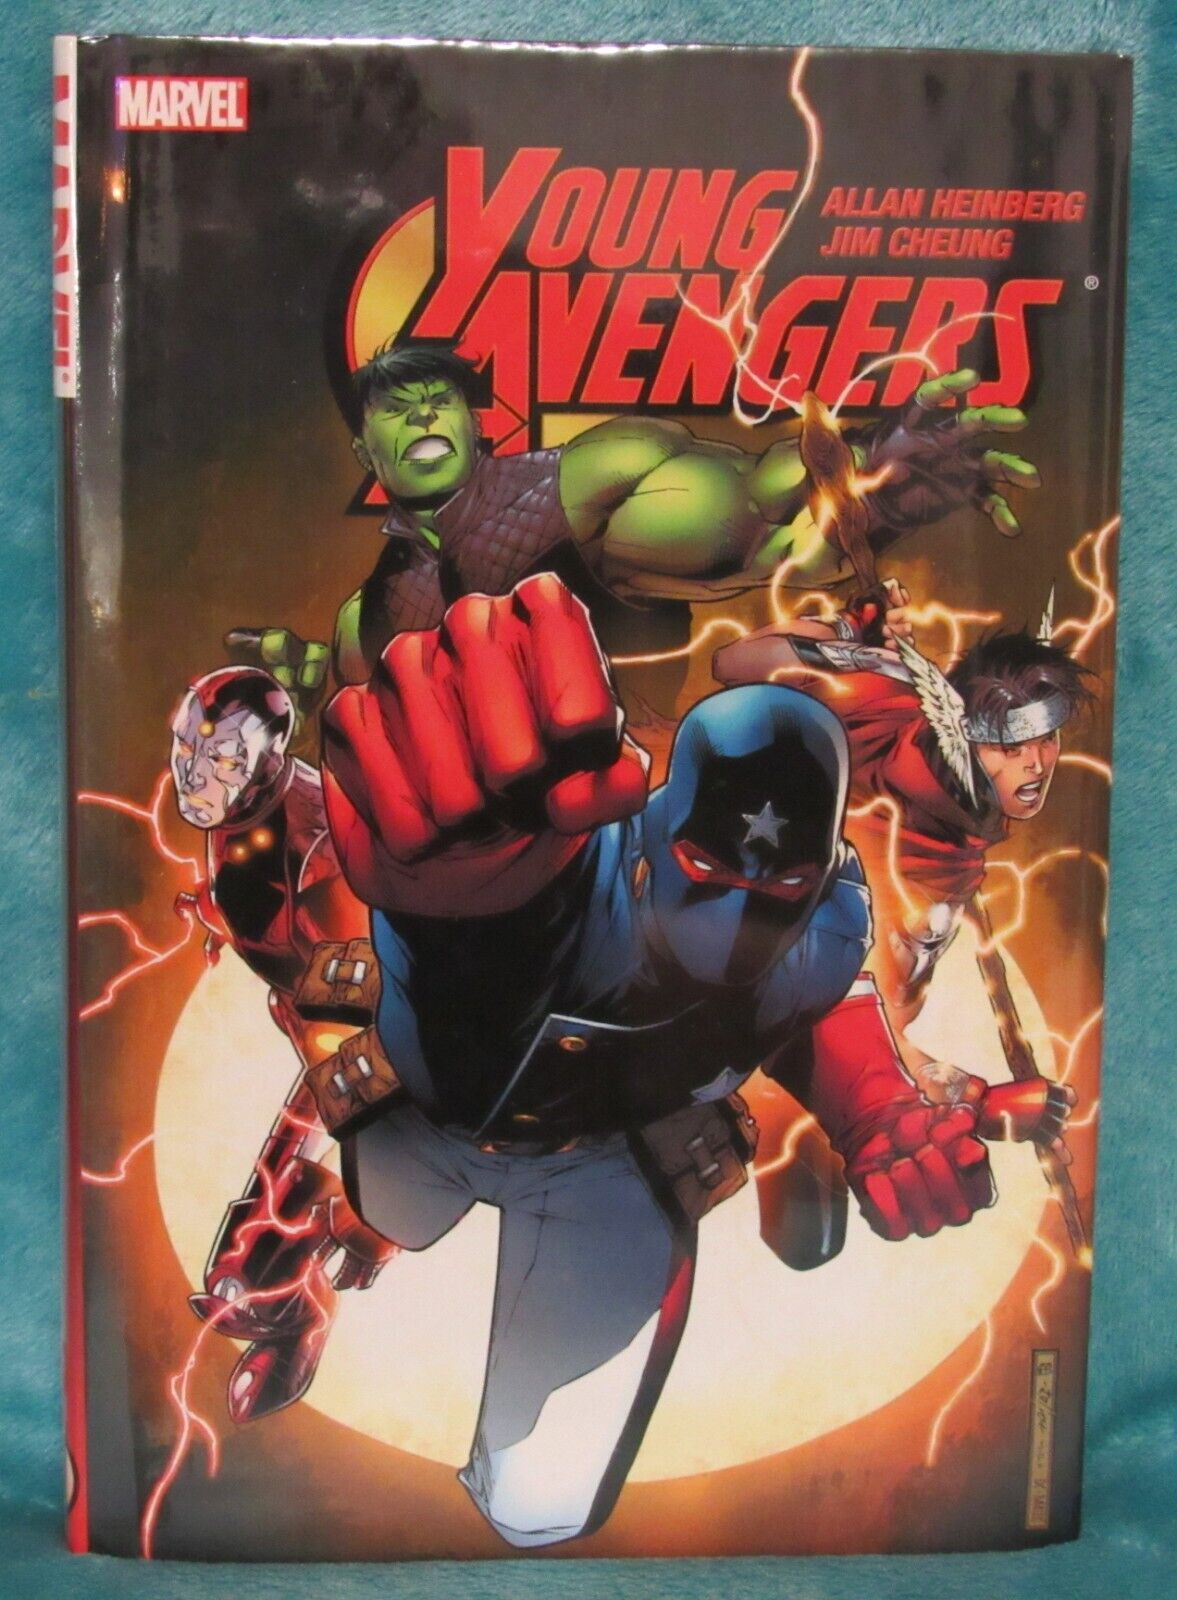 YOUNG AVENGERS Hardcover NEW Sealed OOP OHC Graphic Novel Marvel Comics 2008 1st